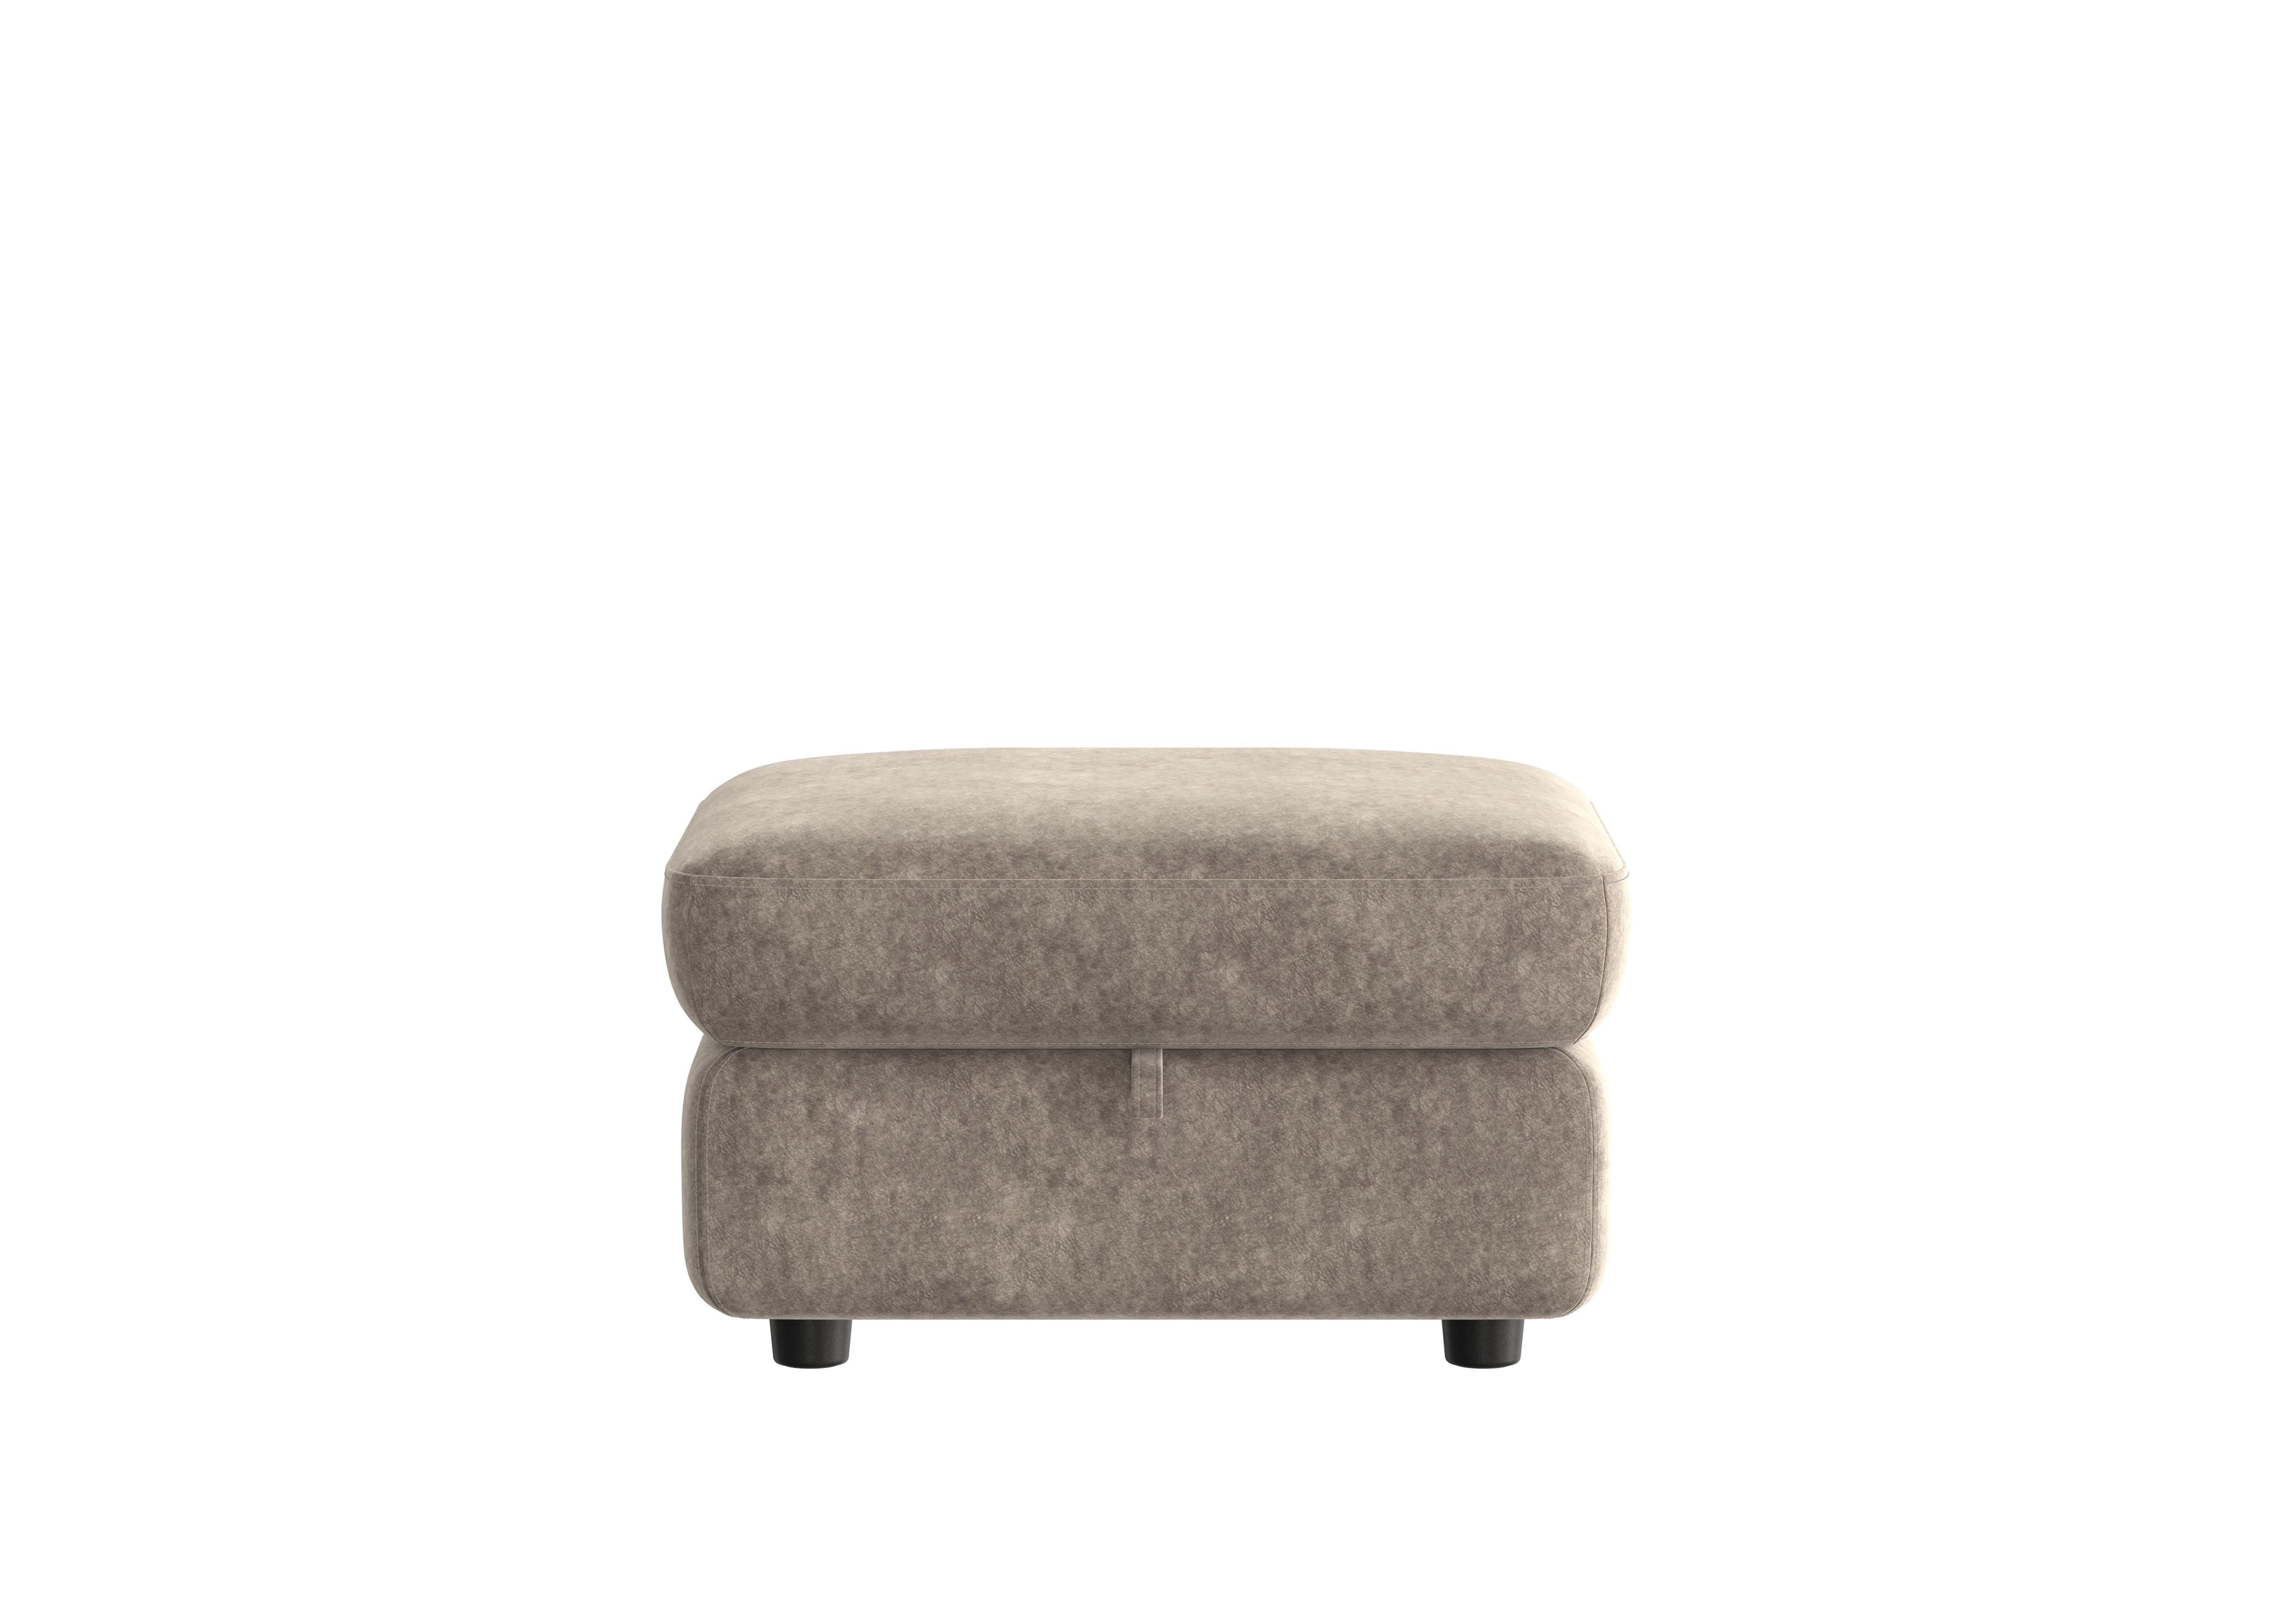 Compact Collection Piccolo Fabric Storage Footstool in Bfa-Bnn-R29 Fv1 Mink on Furniture Village